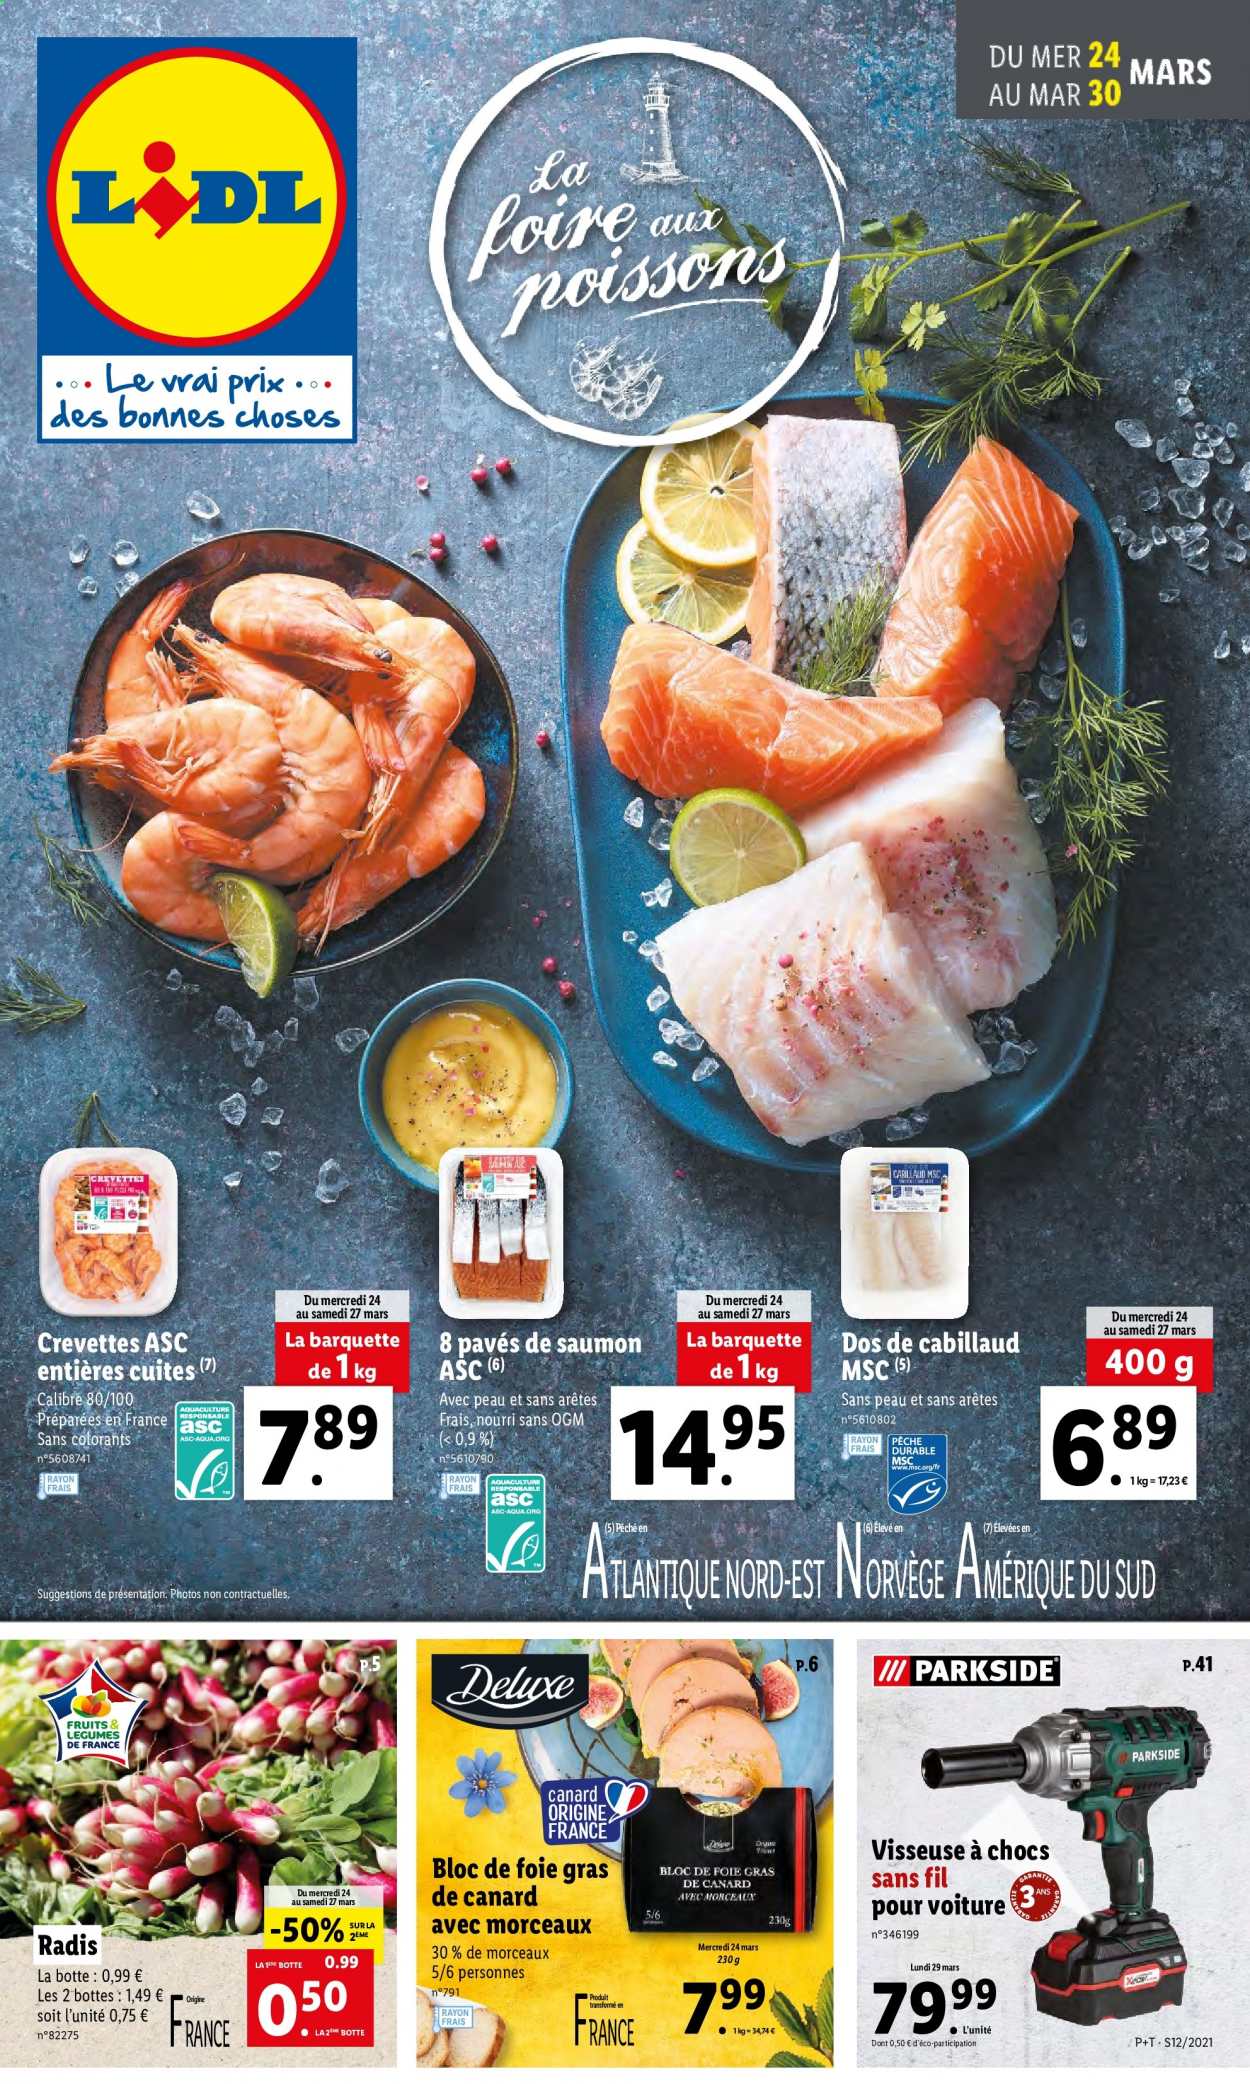 Catalogue Lidl - 24.03.2021 - 30.03.2021. Page 1.